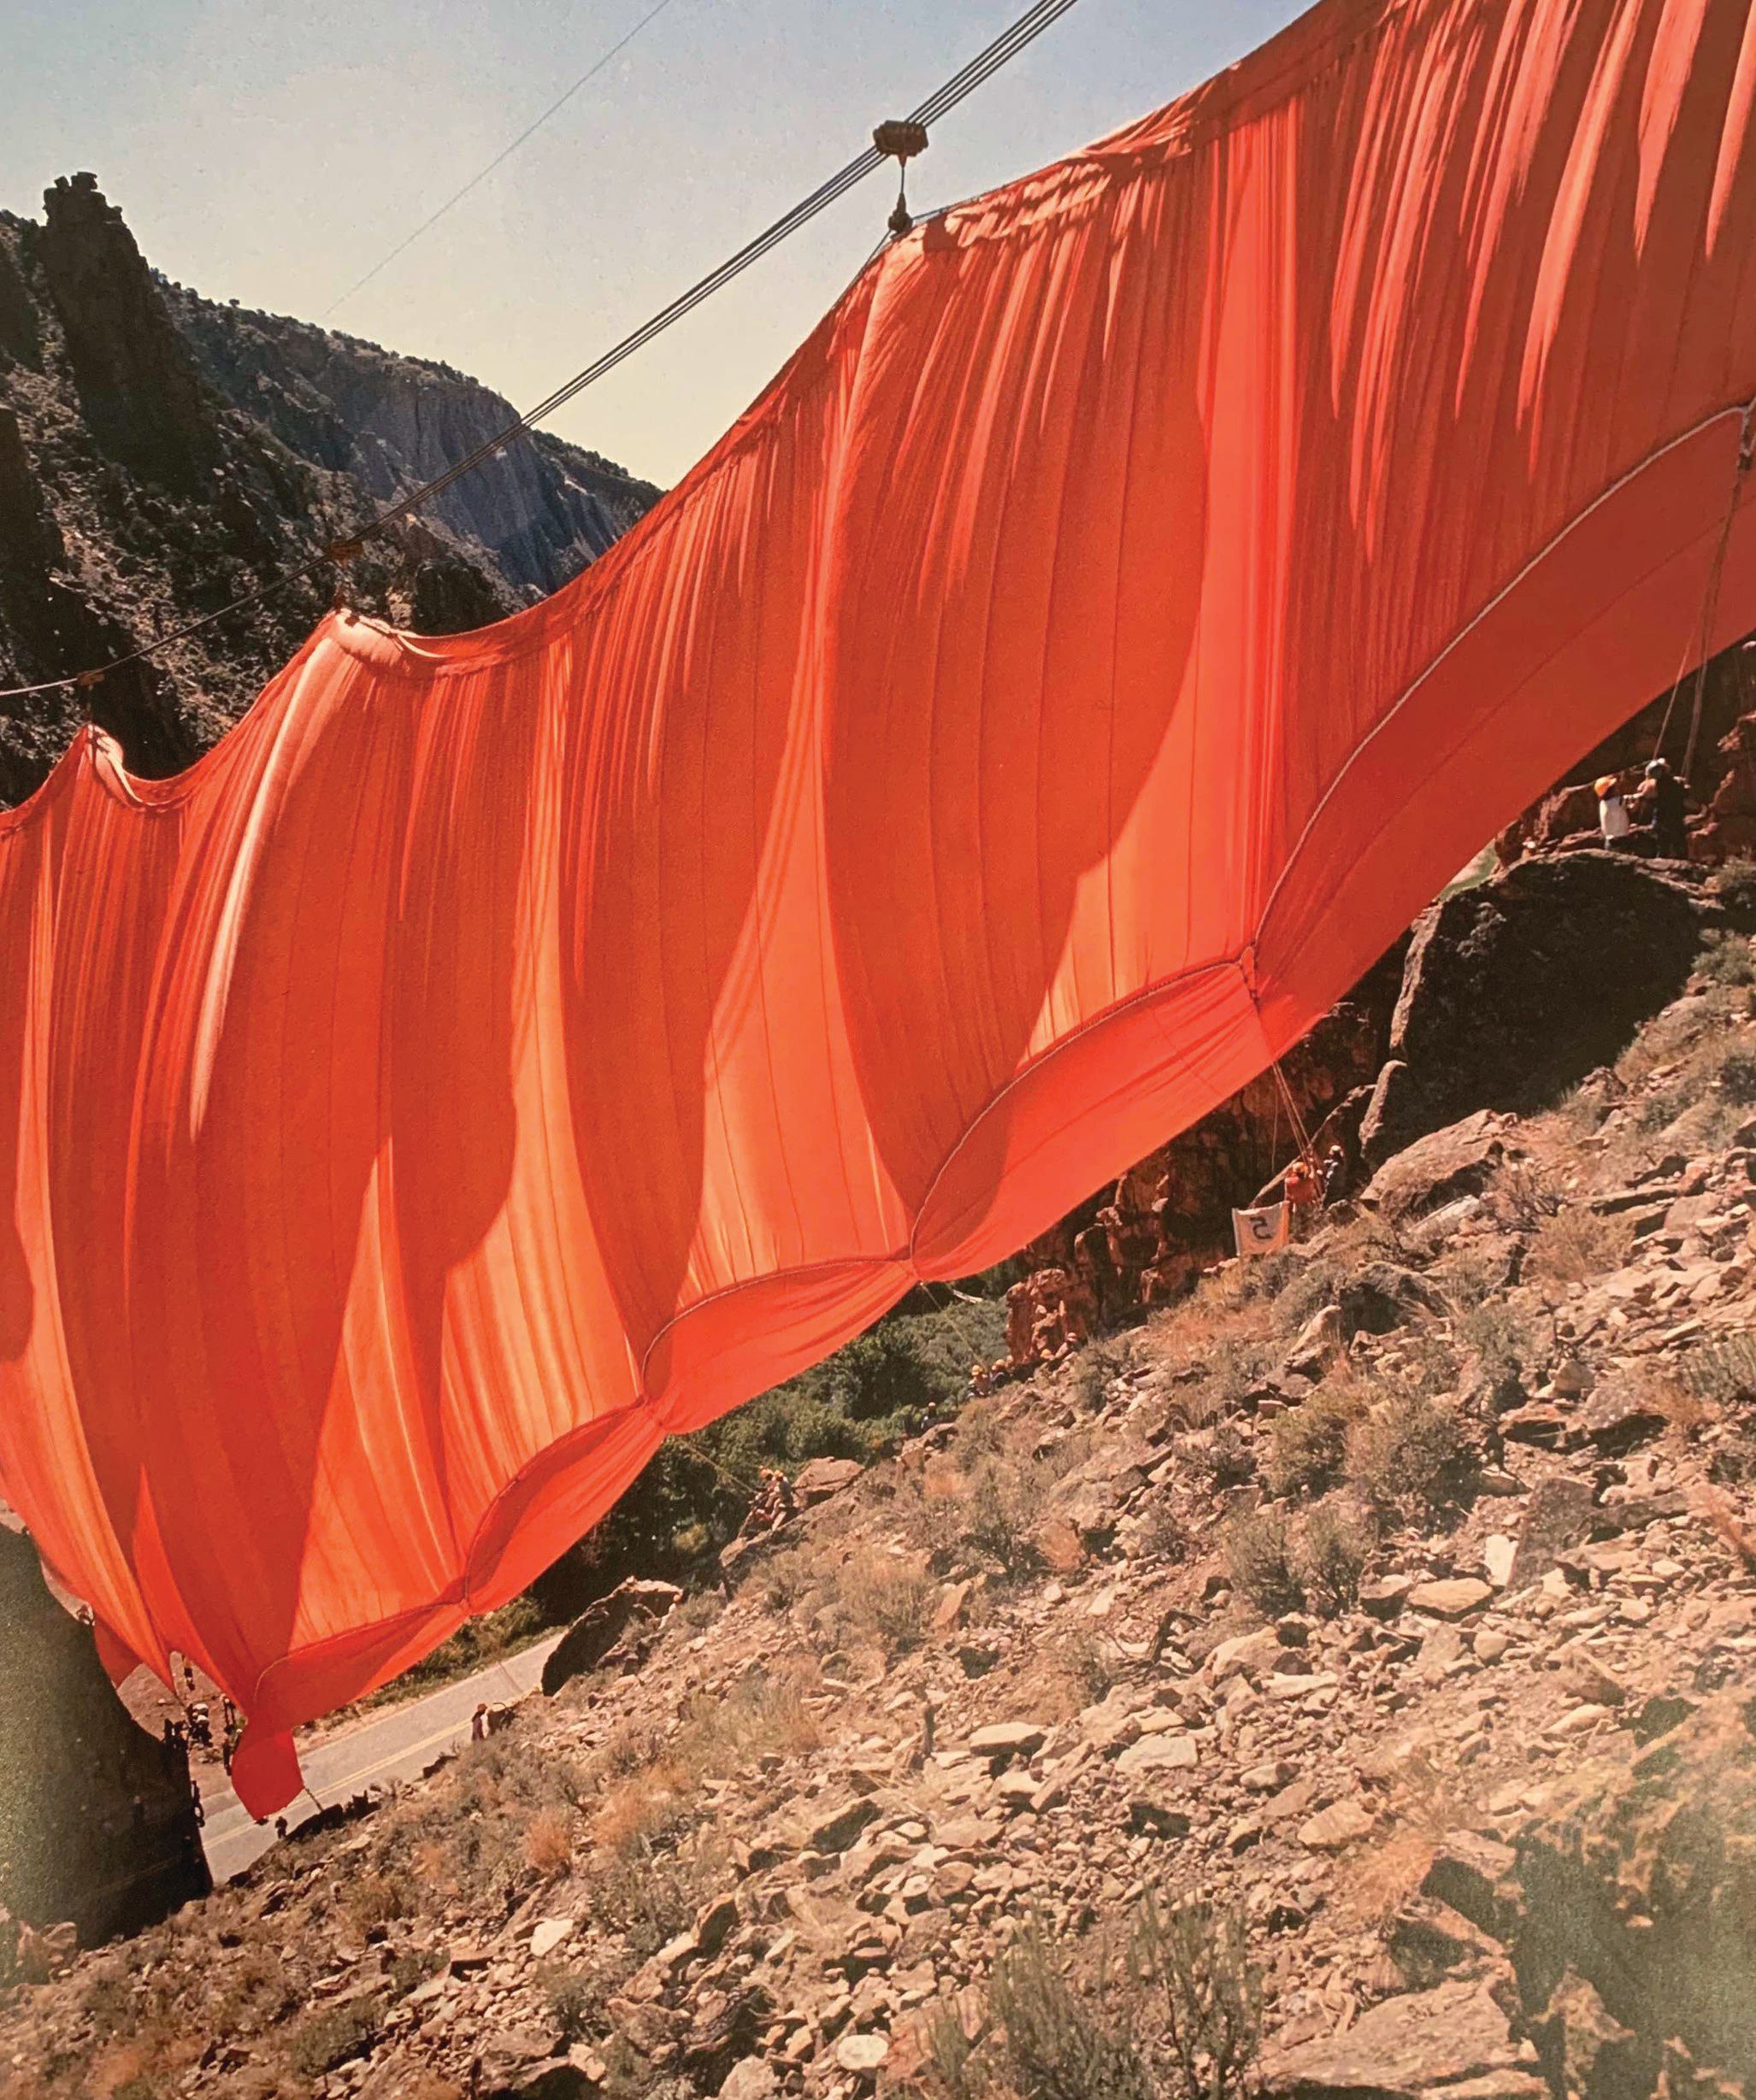 Christo and Jeanne-Claude, “Valley Curtain,” Rifle, Colo., 1970-72. PHOTO COURTESY OF CHRISTO AND JEANNE-CLAUDE FOUNDATION AND J. PAUL GETT Y TRUST